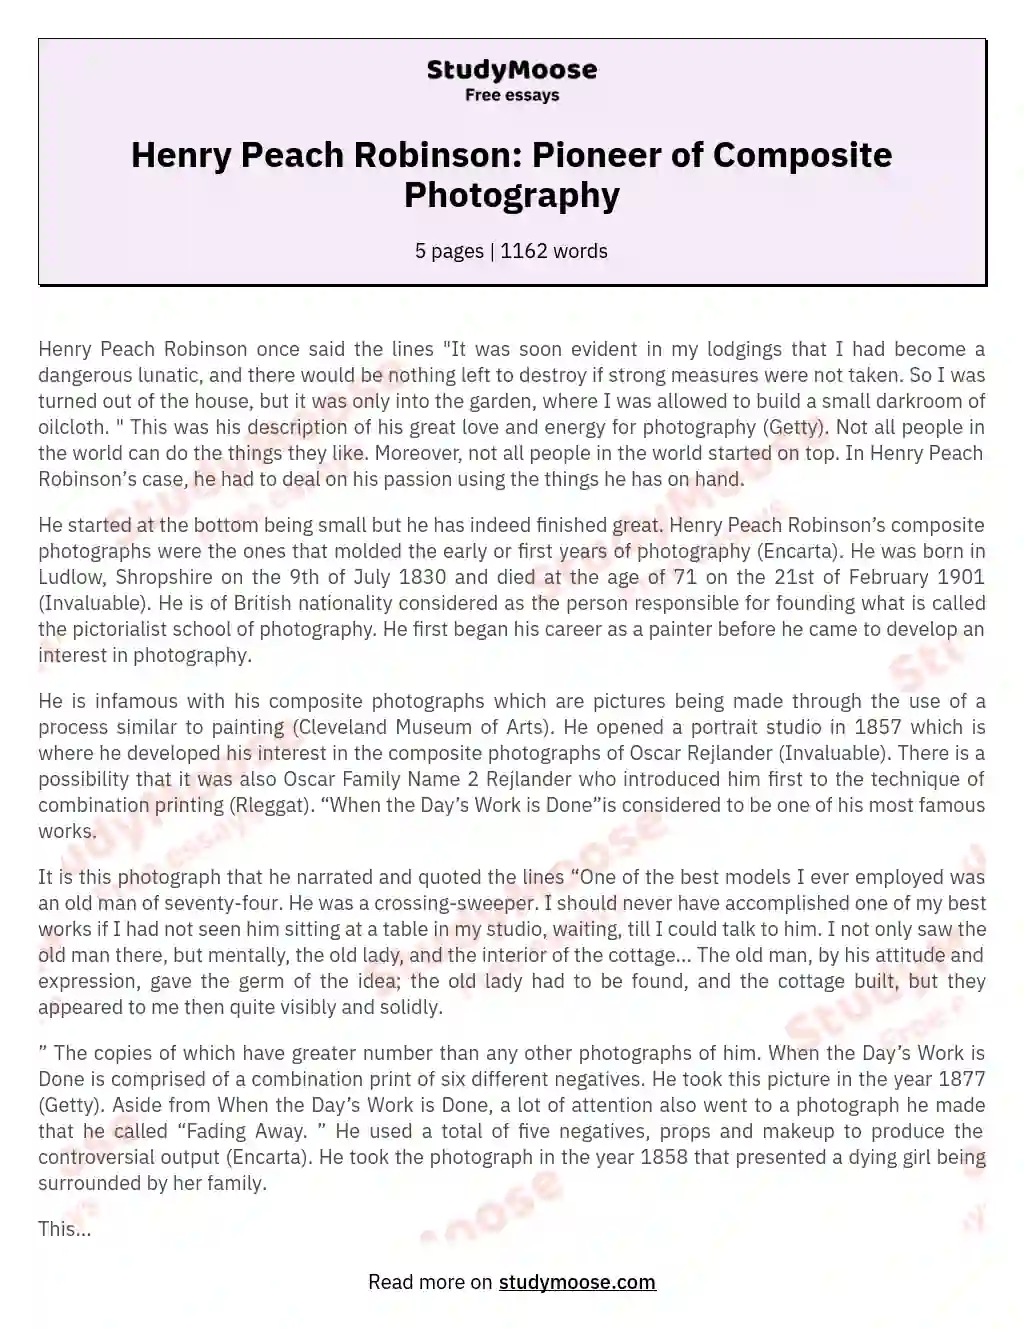 Henry Peach Robinson: Pioneer of Composite Photography essay